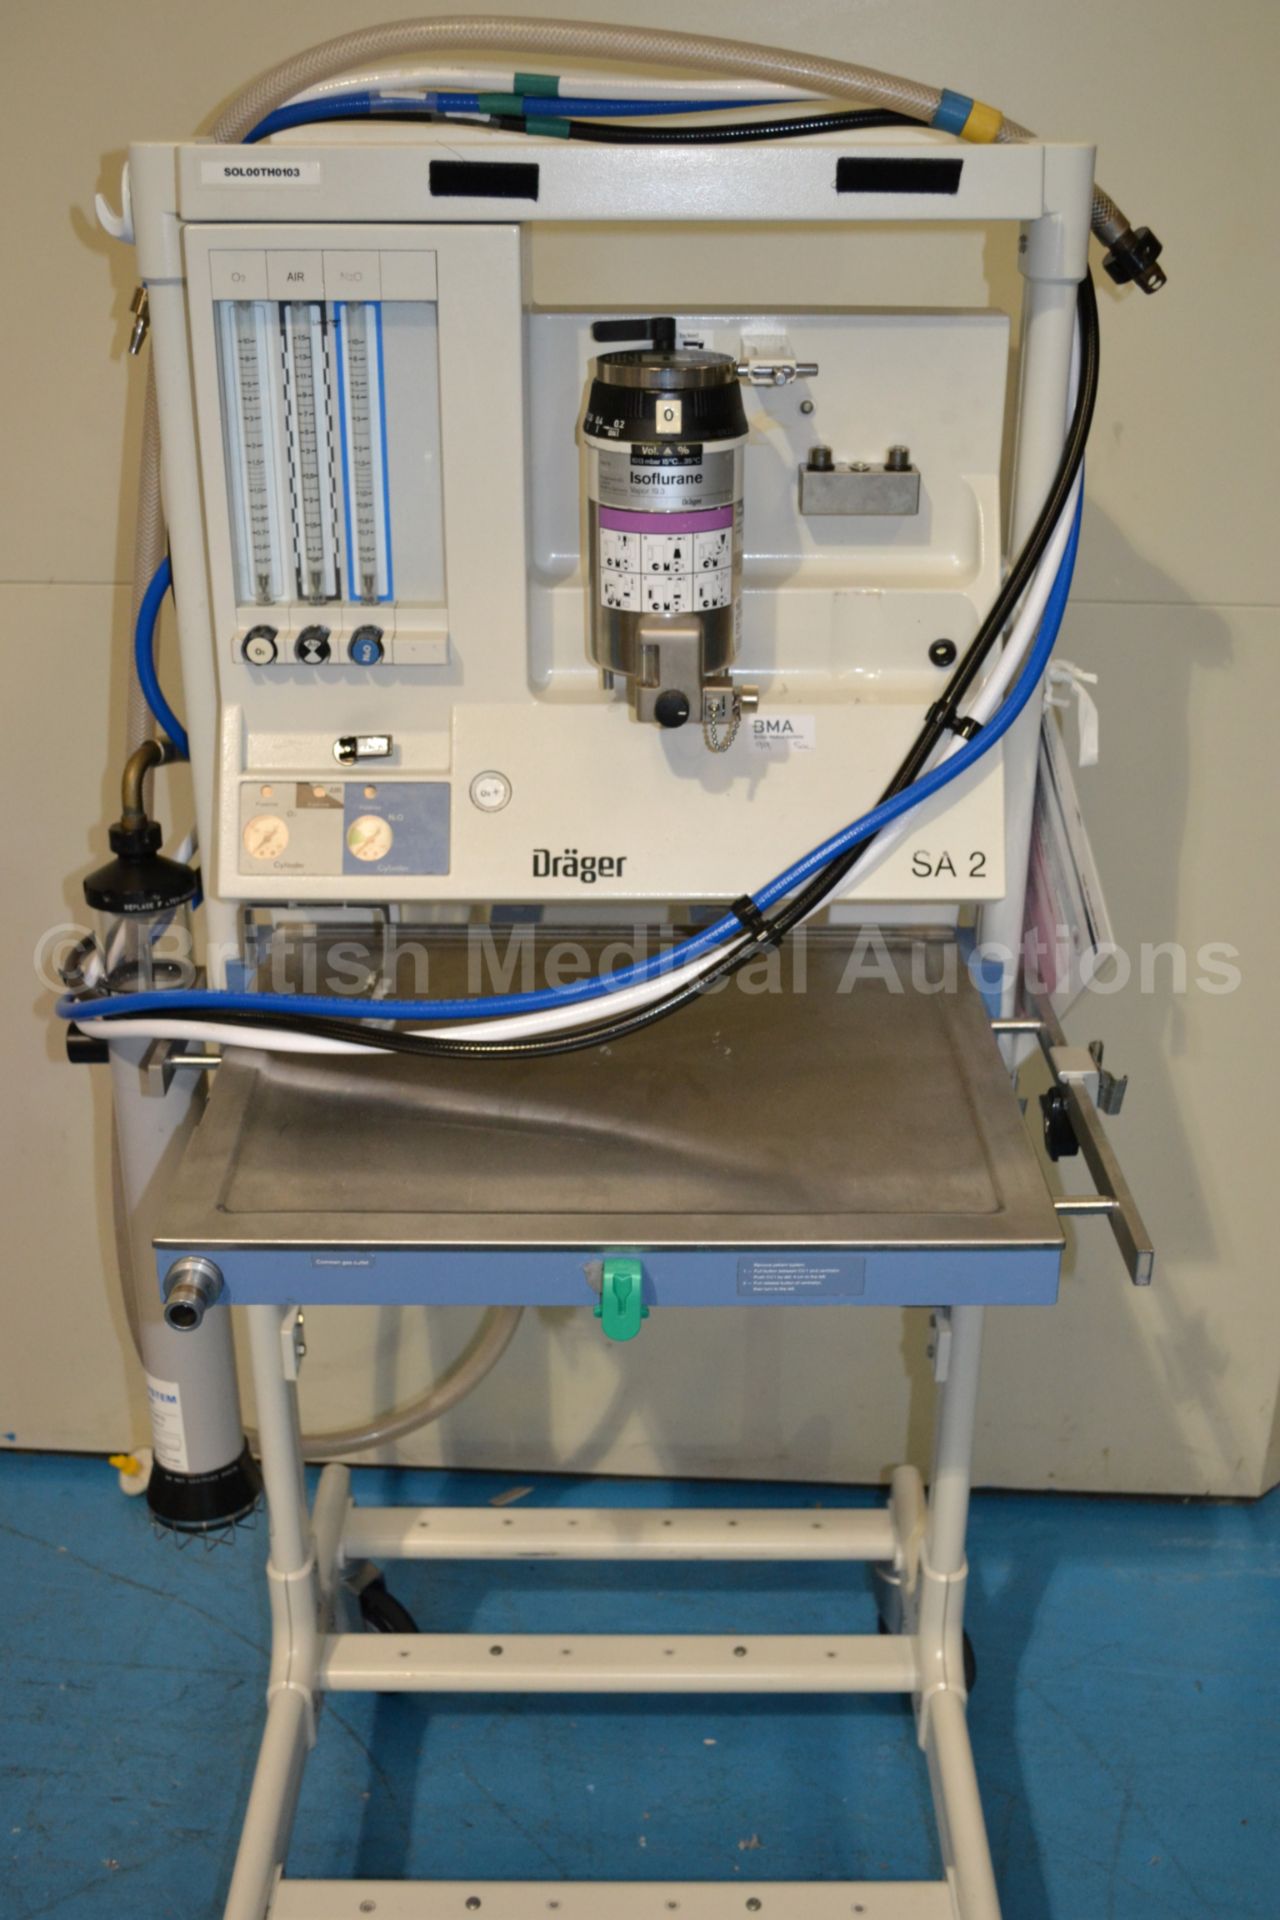 Drager SA 2 Anaesthesia System with Drager Vapor 1 - Image 2 of 4